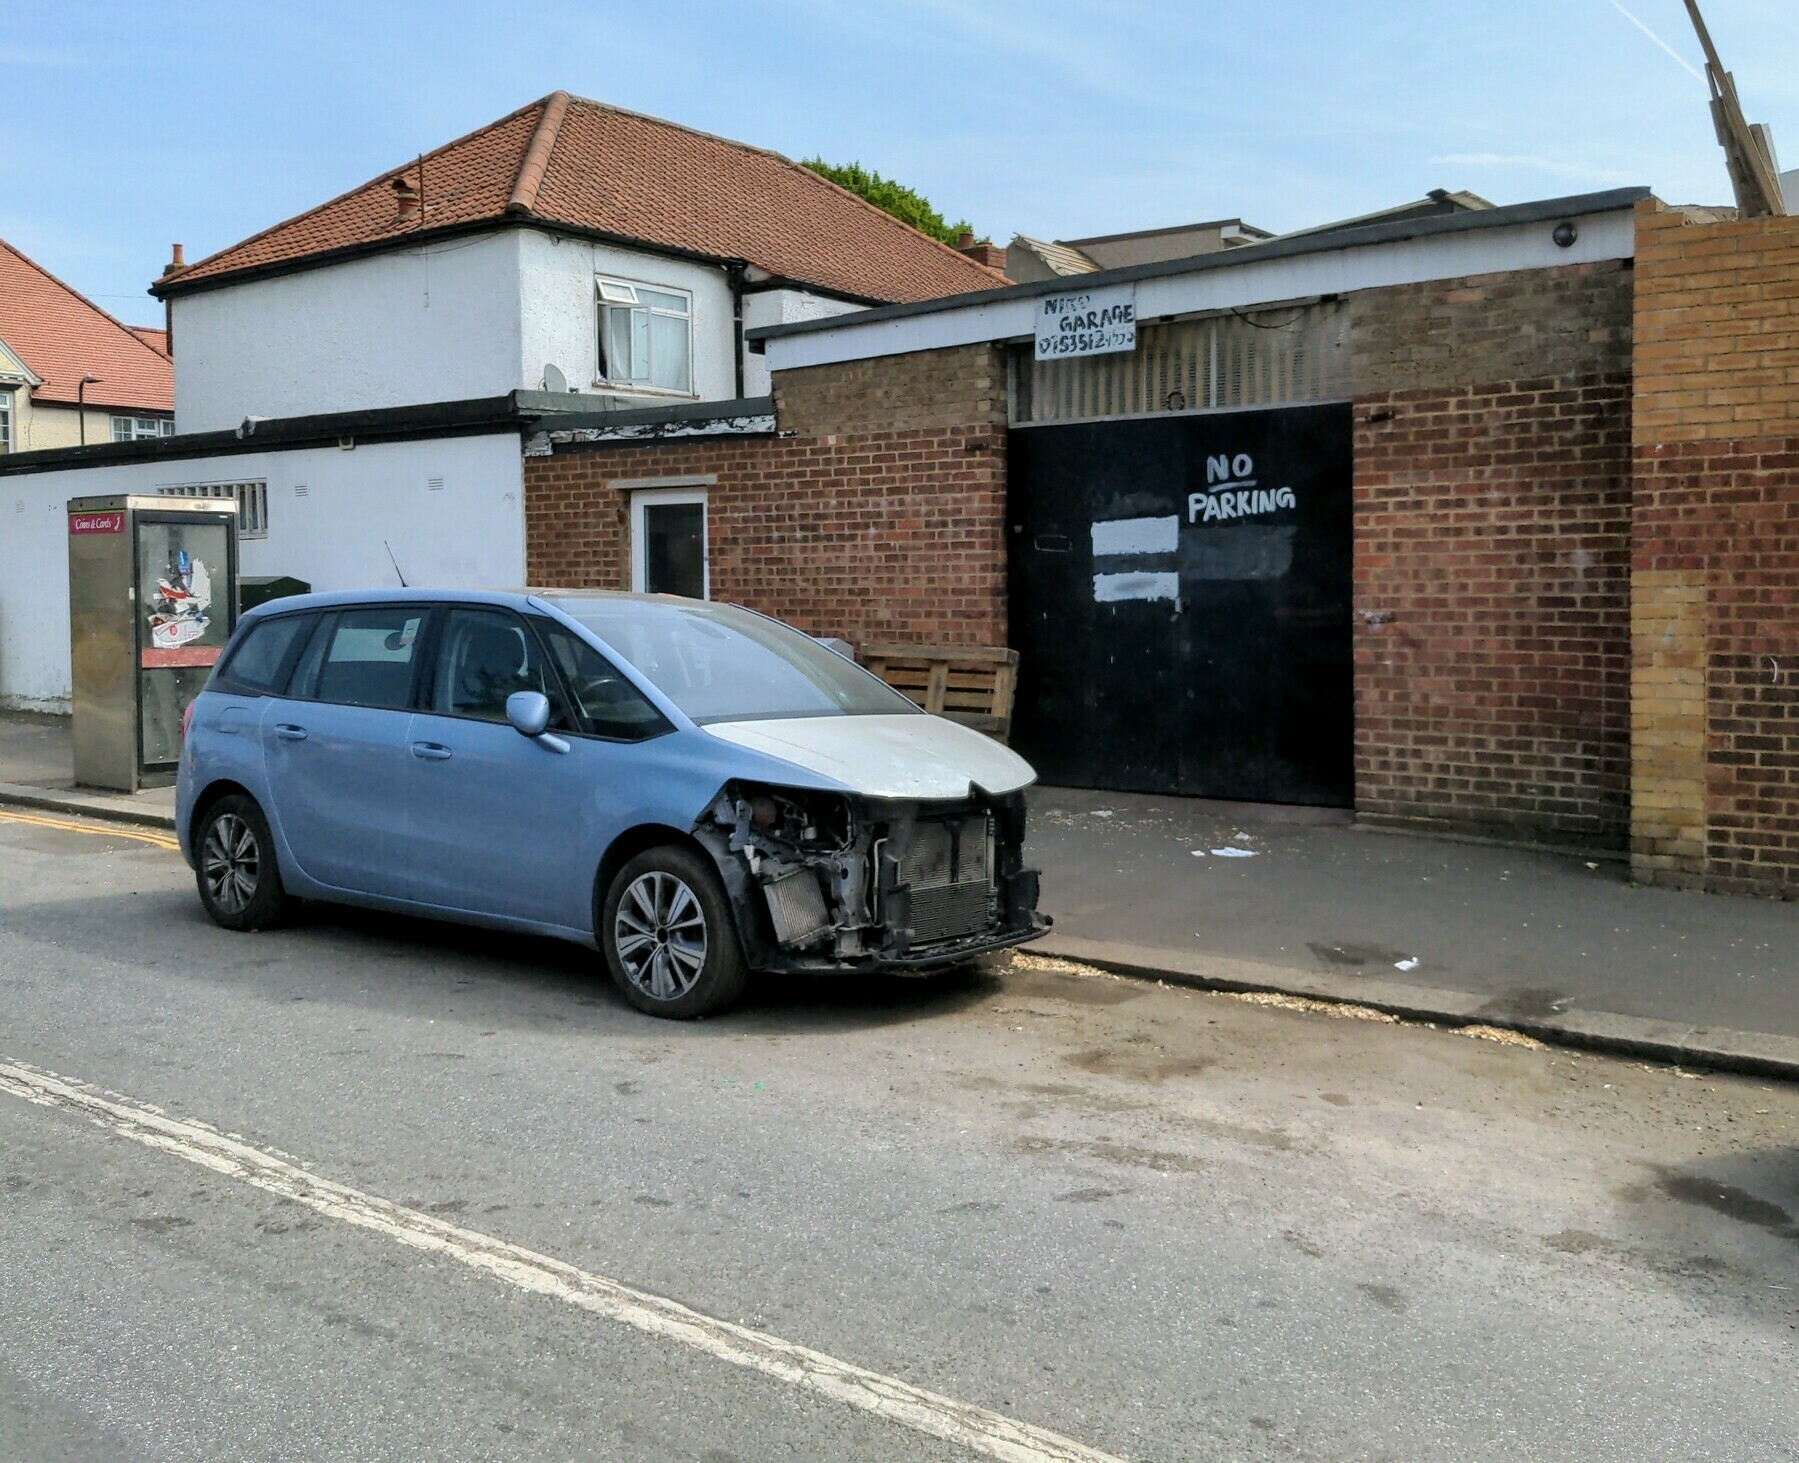 Photo of a car parked outside a garage displaying a handwritten "No Parking" sign in Southall Green. The front of the car is missing.